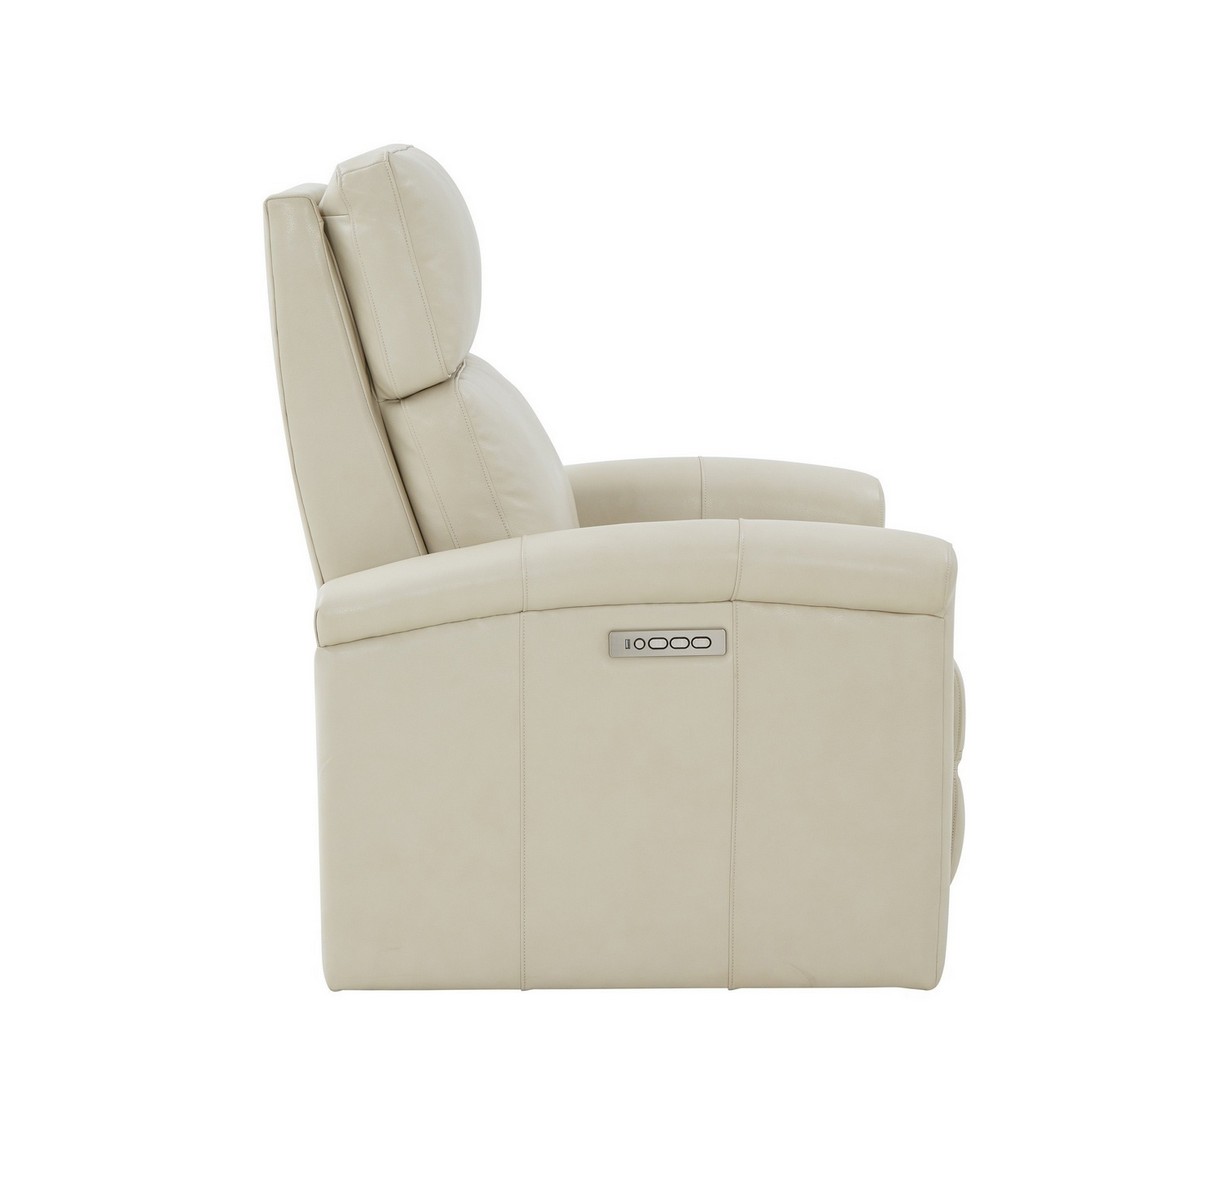 Barcalounger Jaxon Zero Gravity Power Recliner Chair with Power Head Rest and Lumbar - Barone Parchment/All Leather